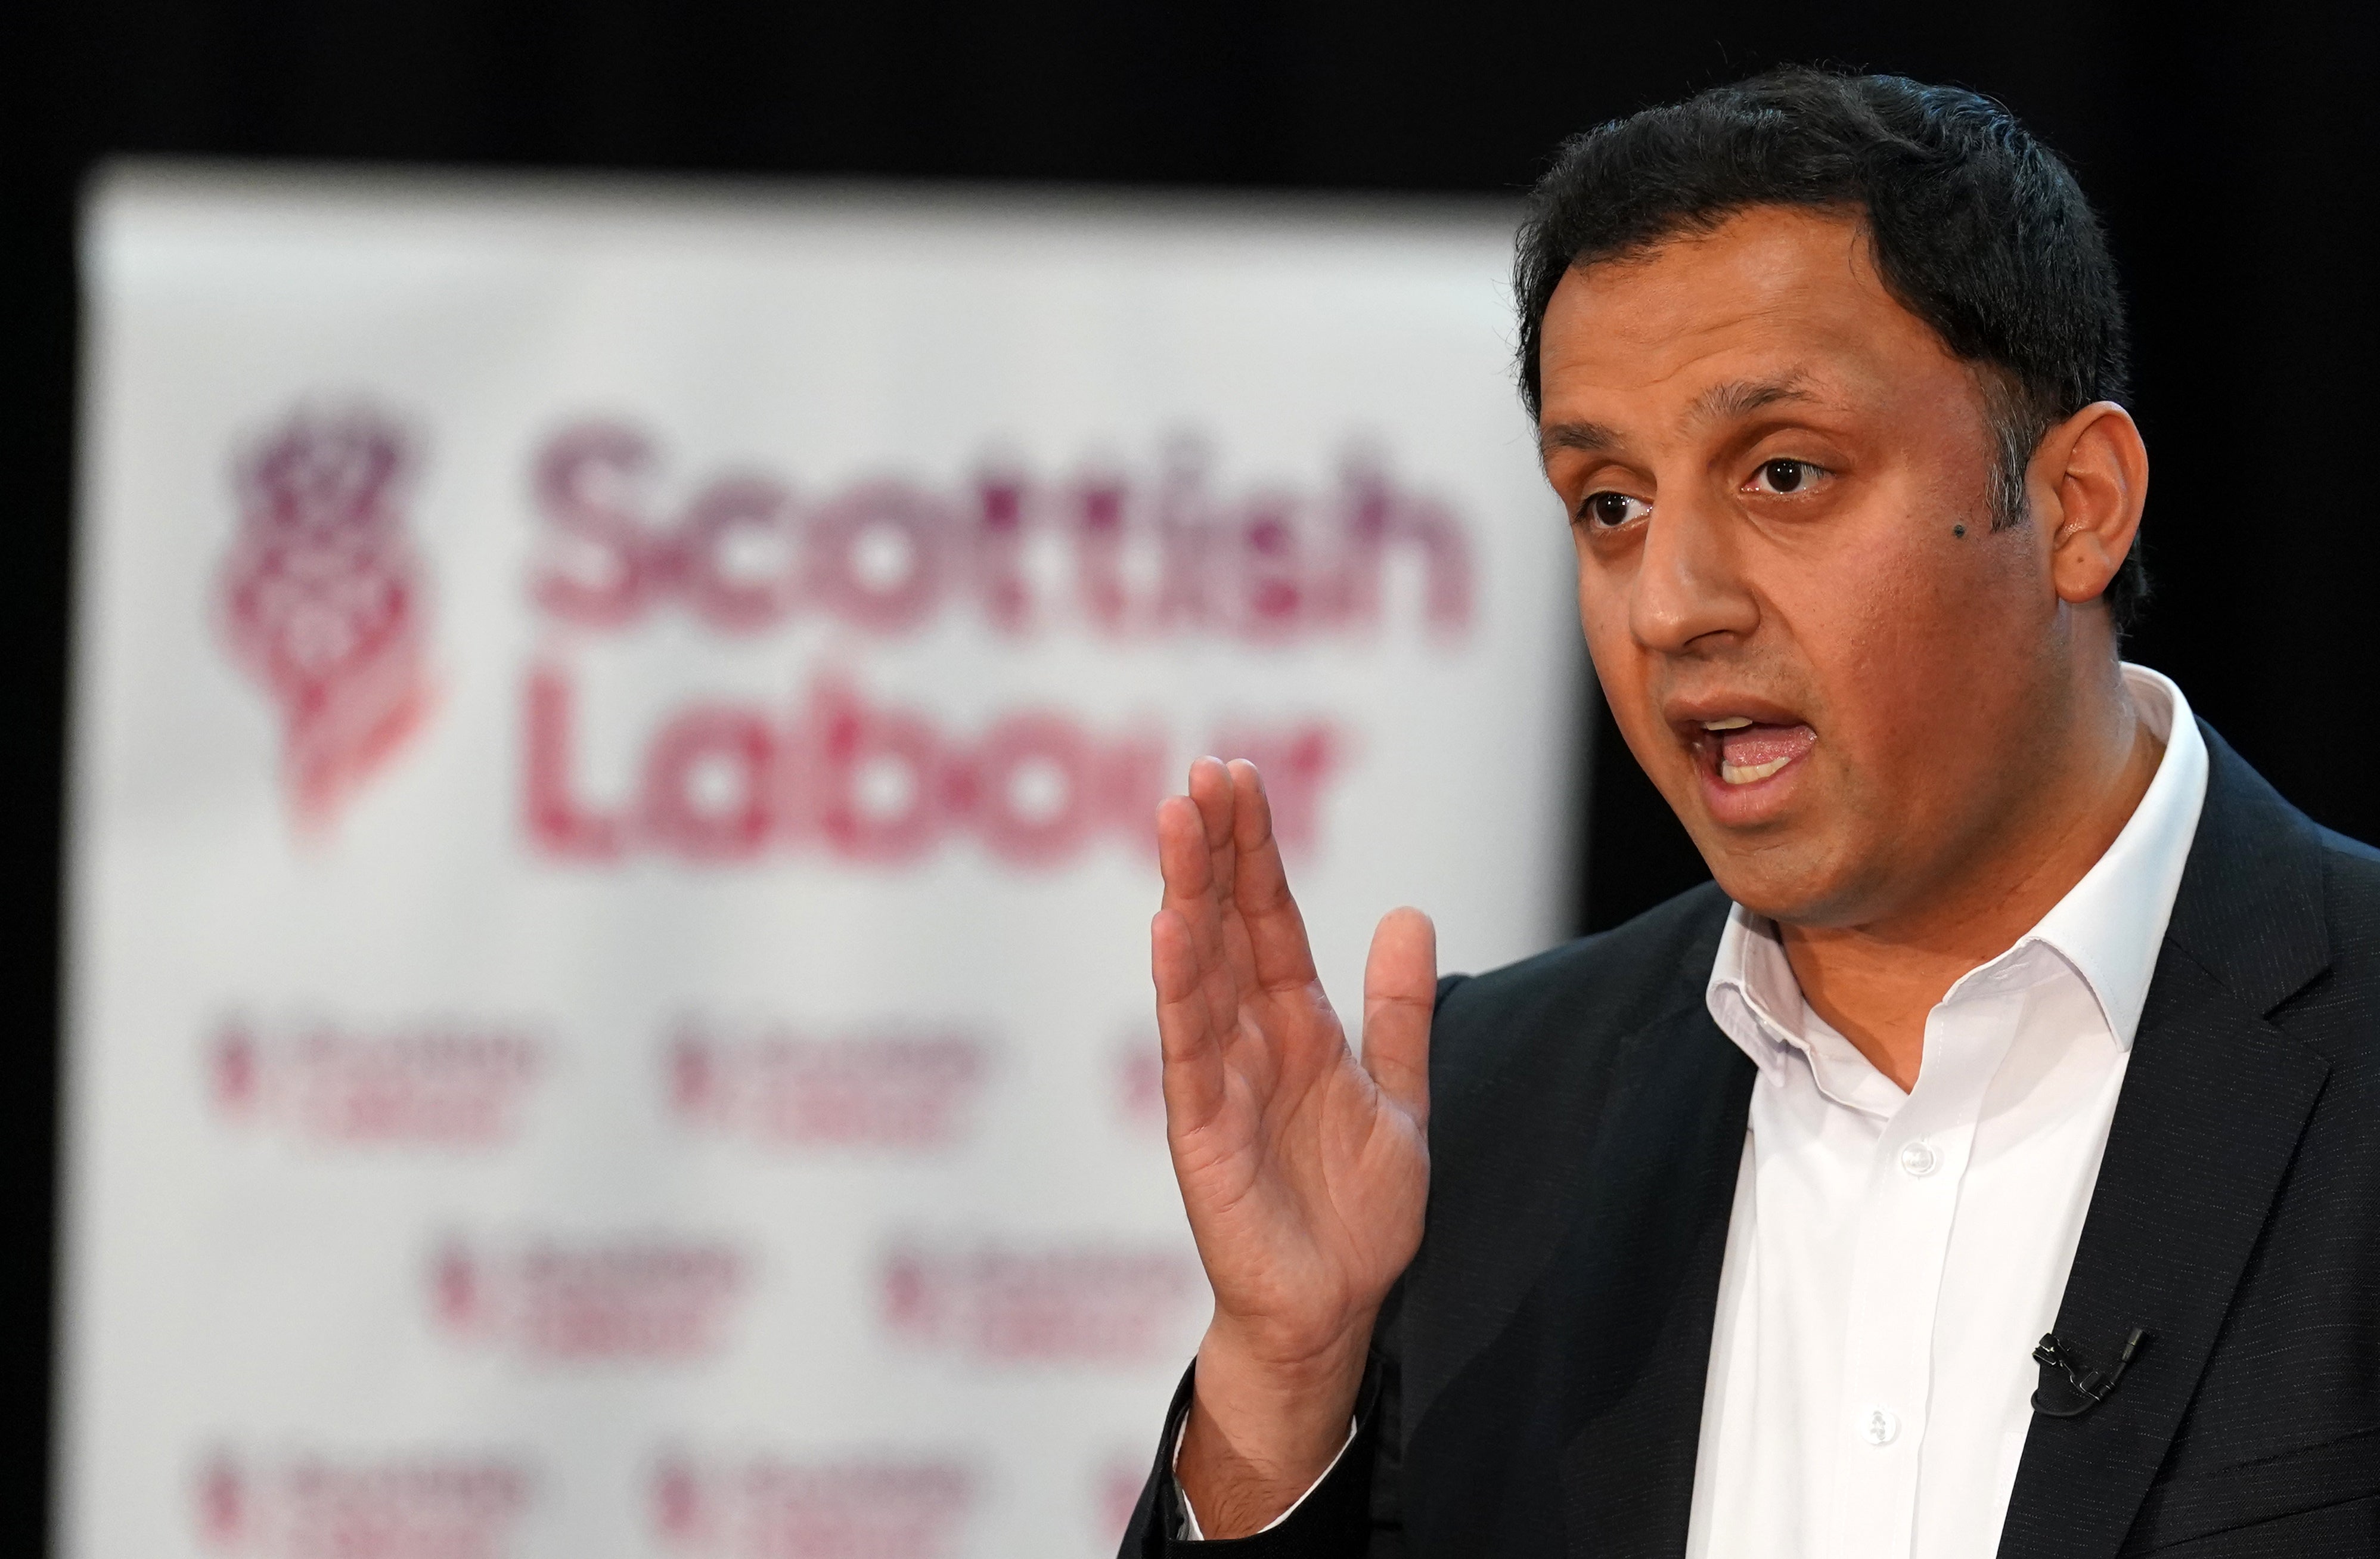 The Scottish Labour leader was speaking ahead of the announcement of the winner in the Tory leadership contest (Andrew Milligan/PA)